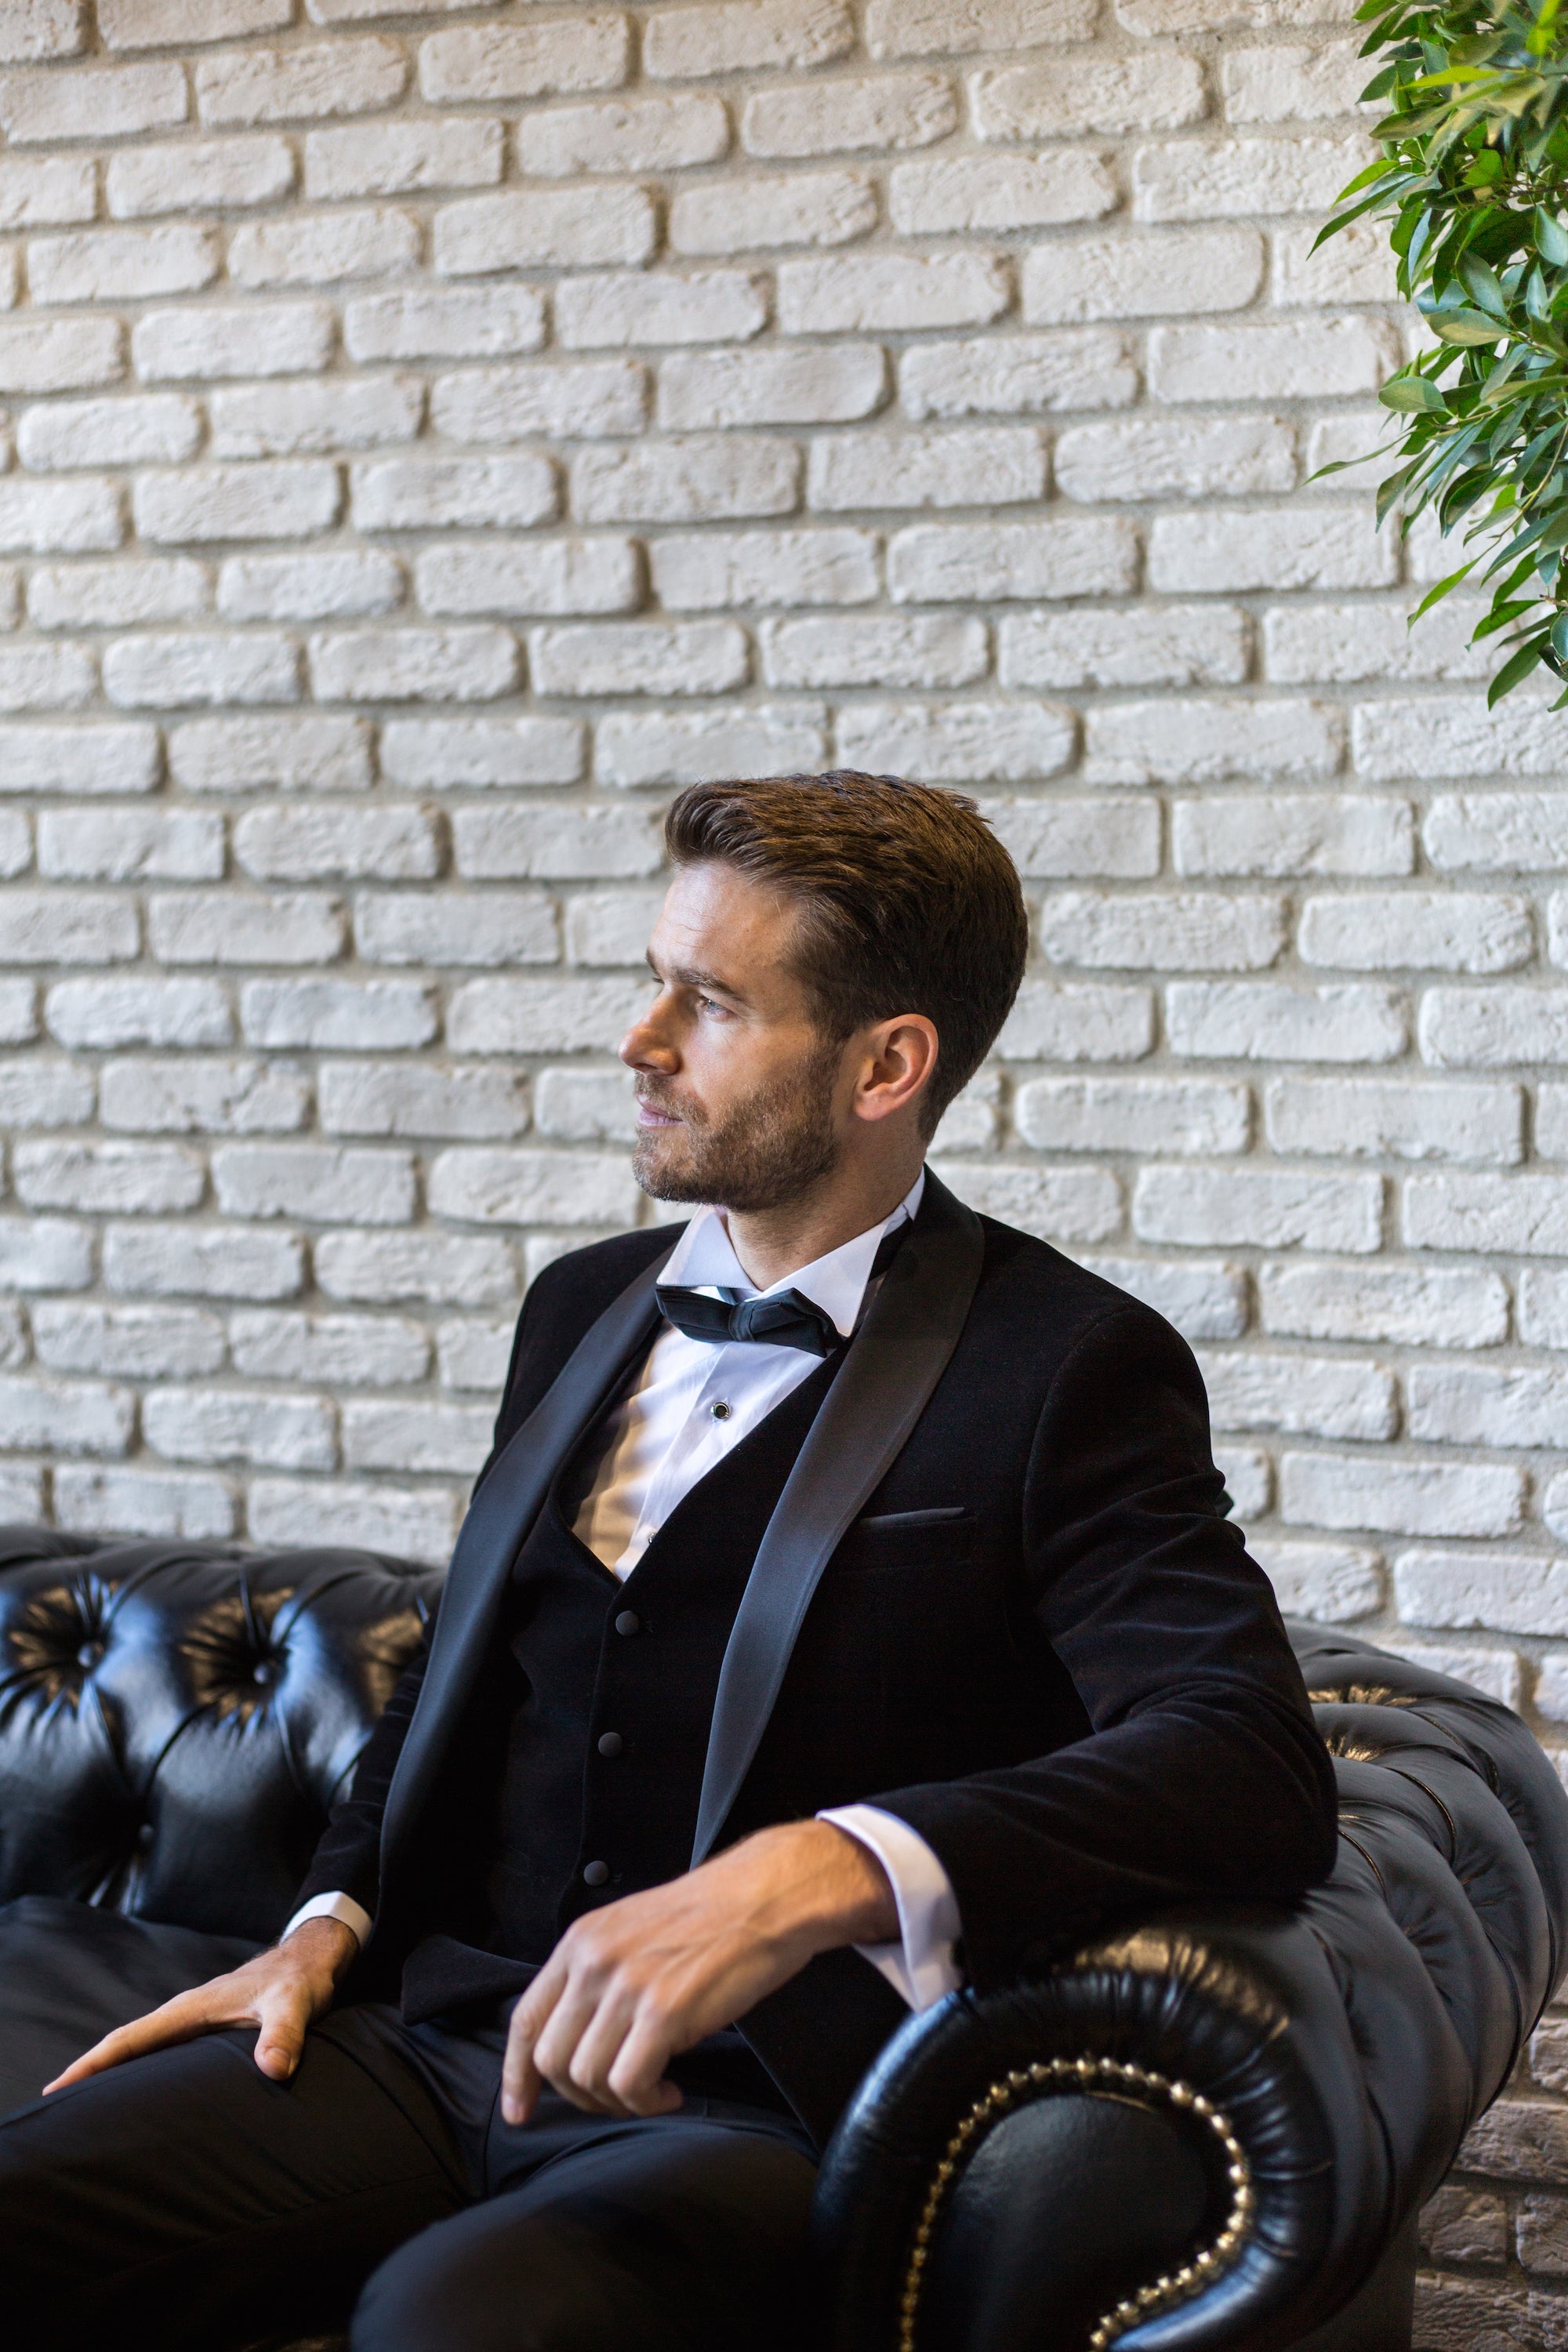 What is a Tuxedo? Difference Between Tuxedo and Suit – Jack Martin